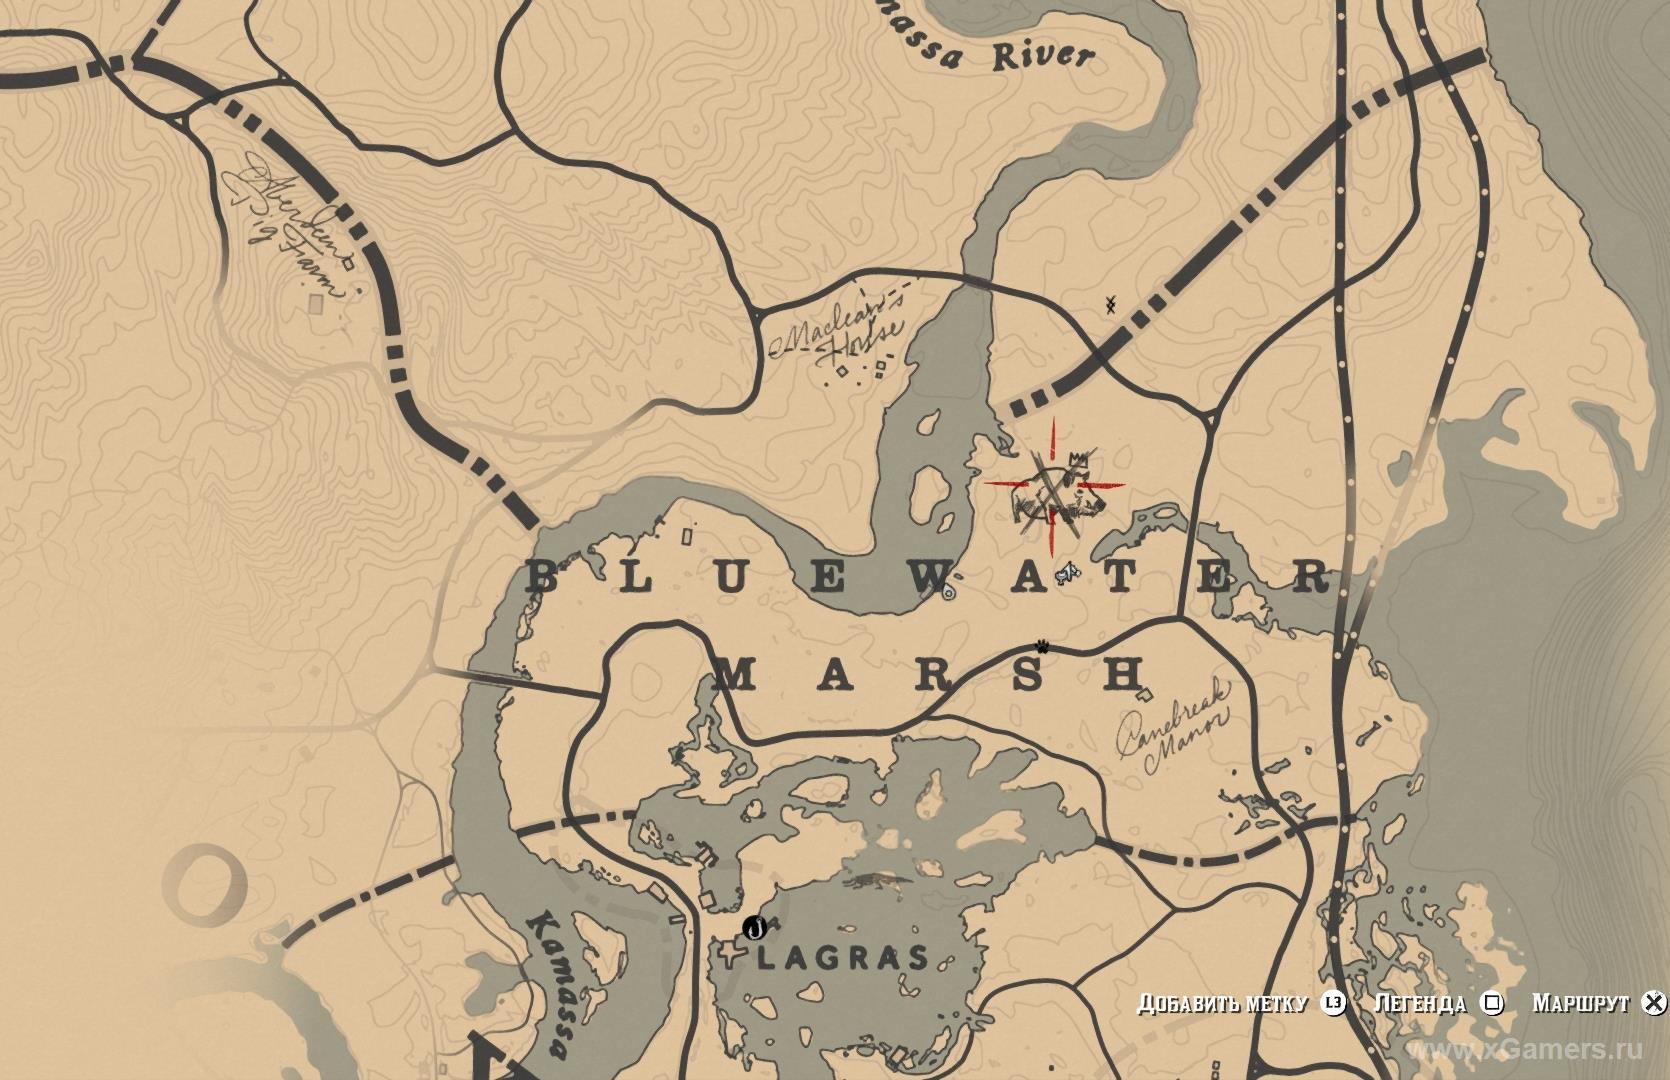 Location of the legendary boar